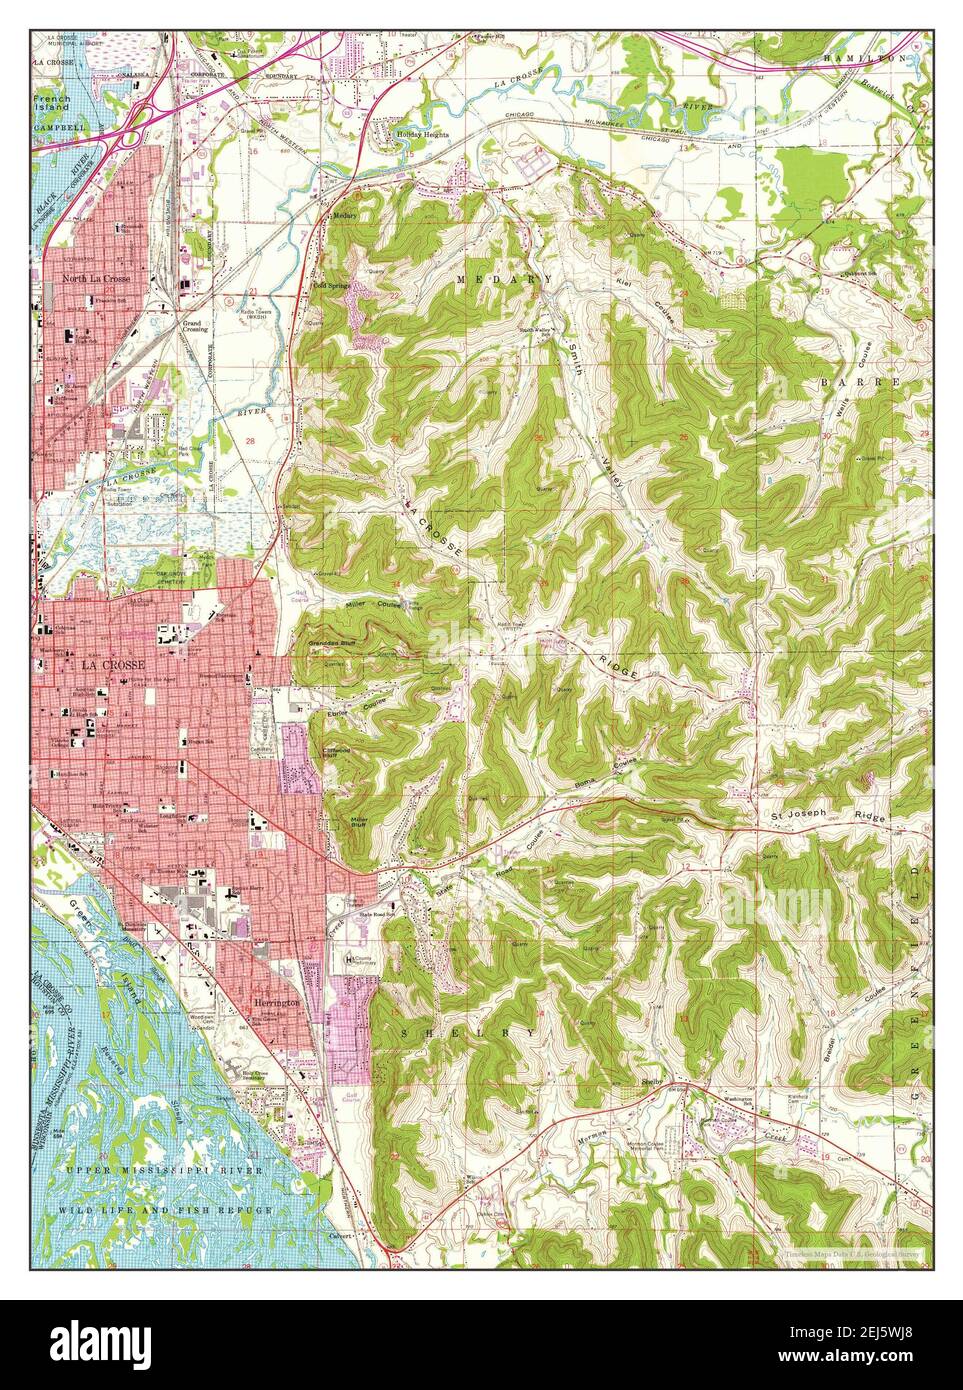 La Crosse, Wisconsin, map 1963, 1:24000, United States of America by Timeless Maps, data U.S. Geological Survey Stock Photo